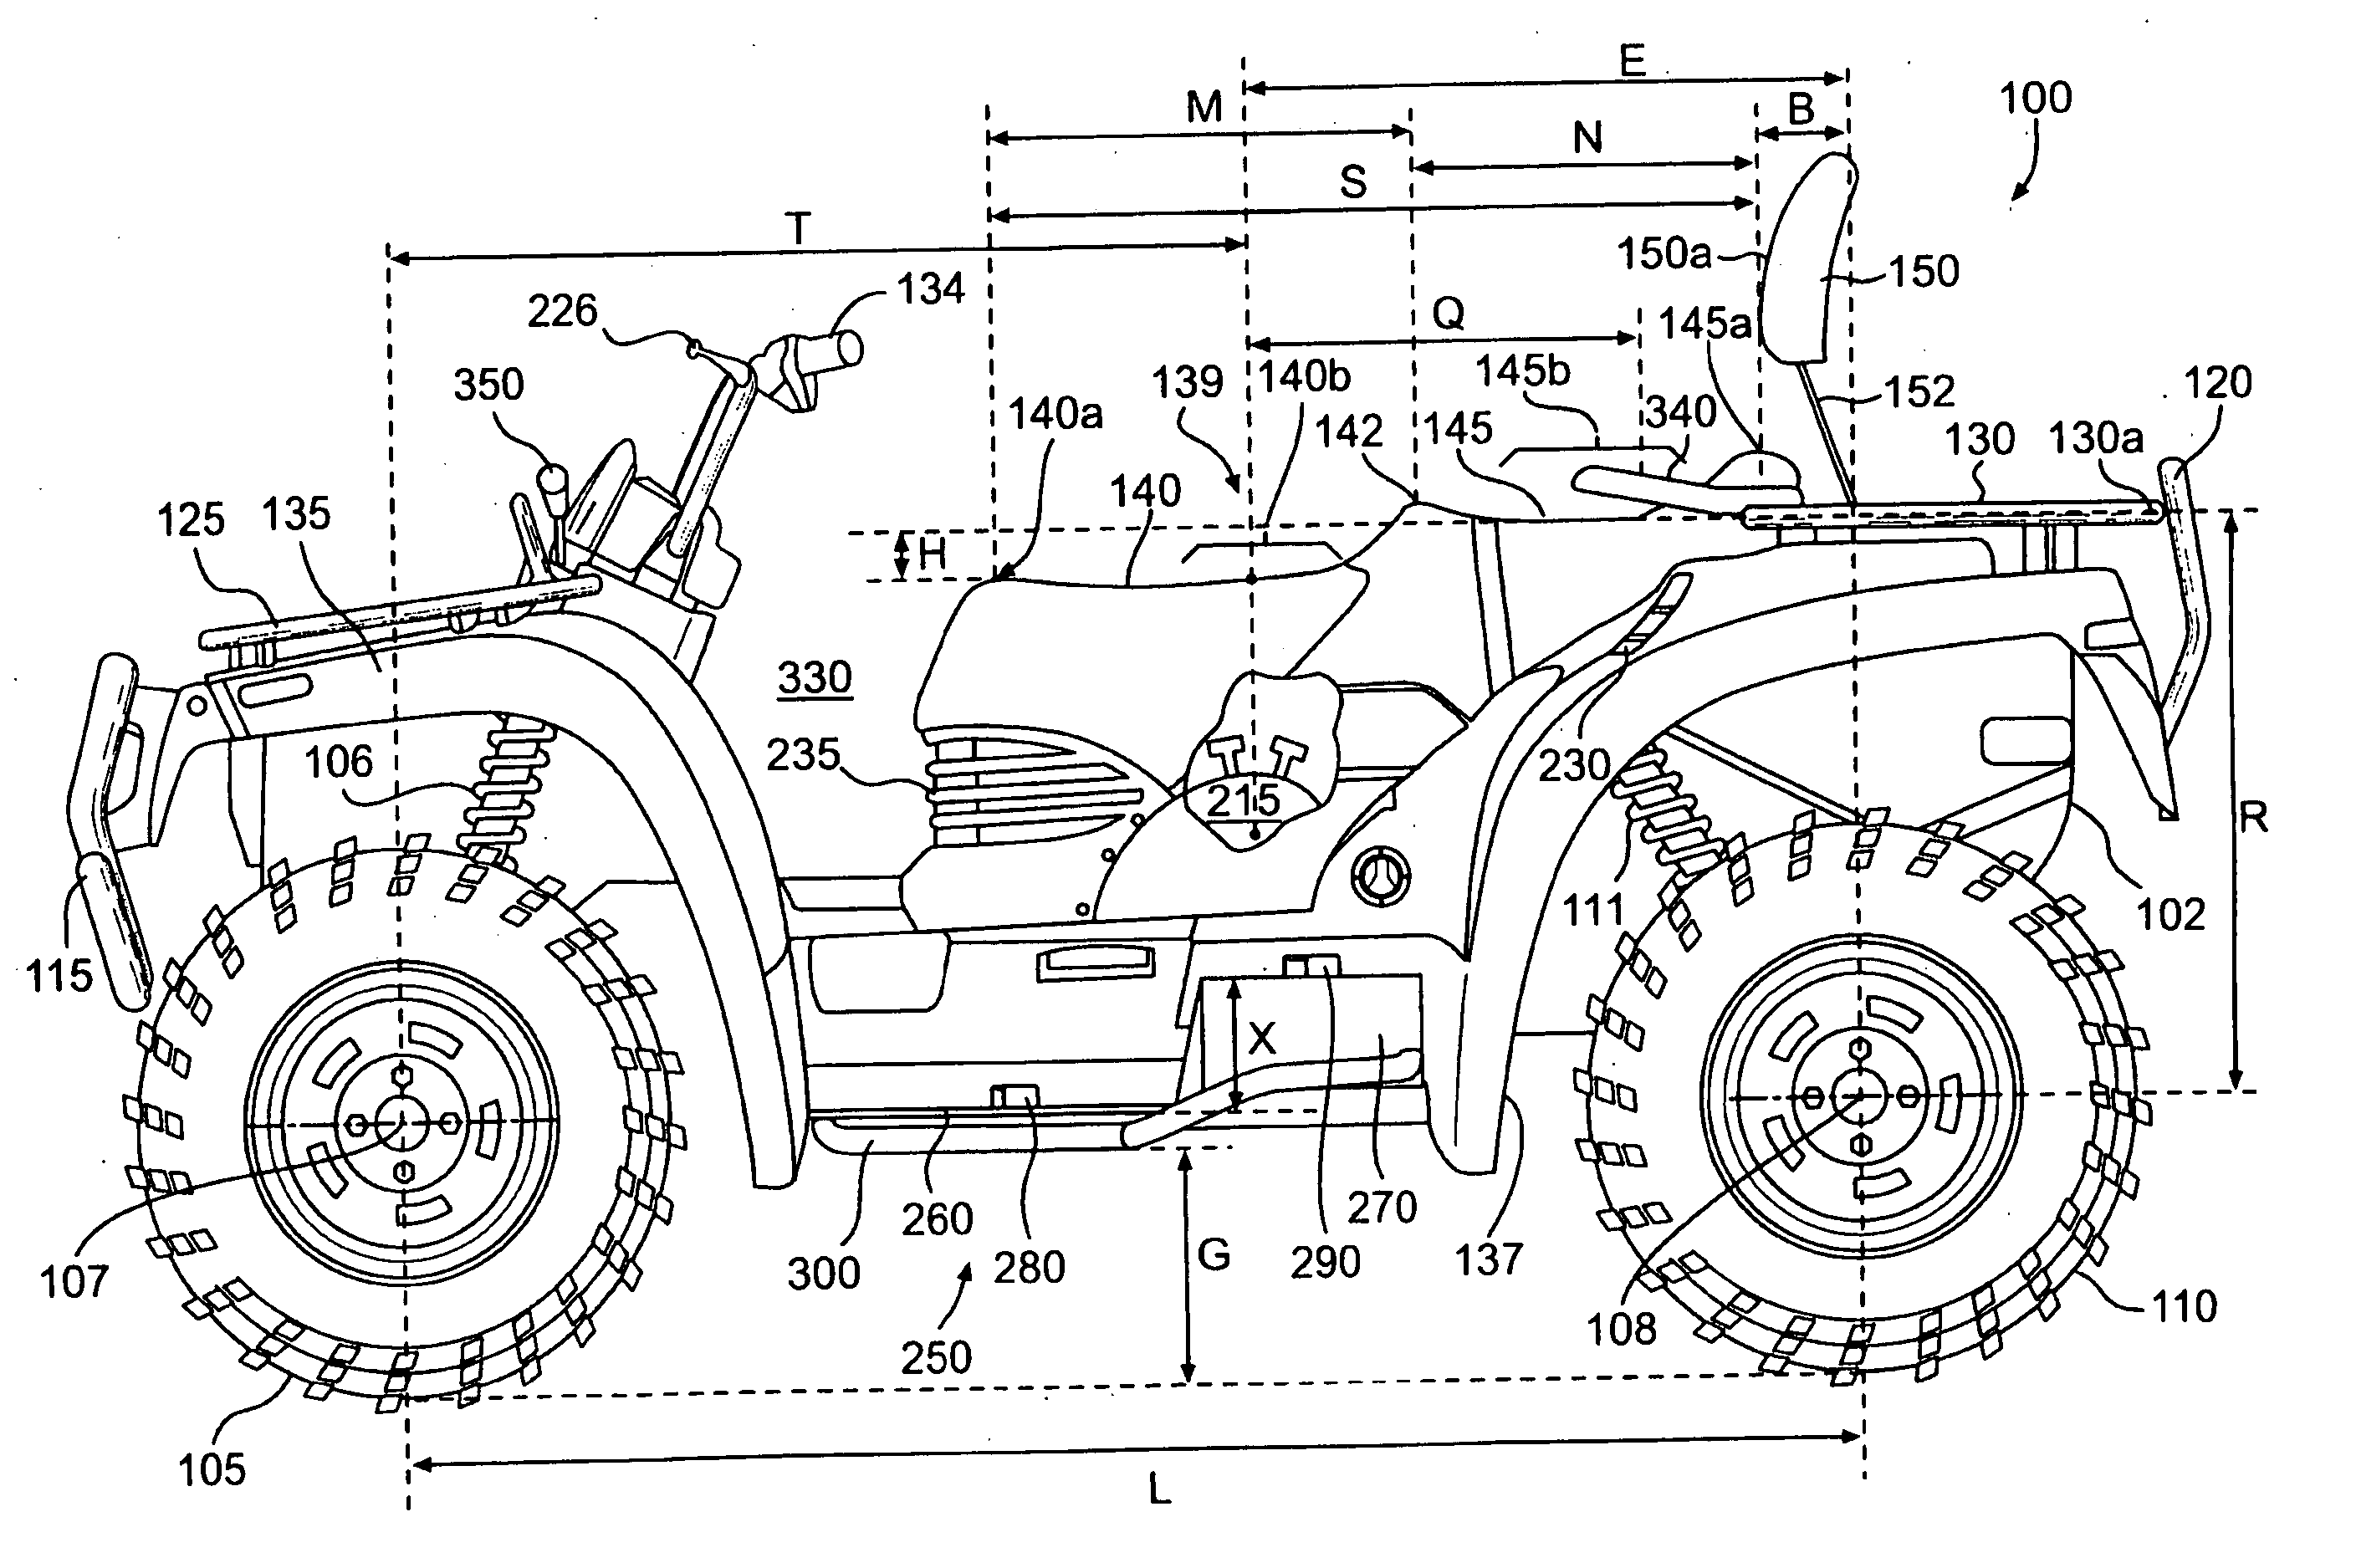 All-terrain vehicle with driver and passenger seating